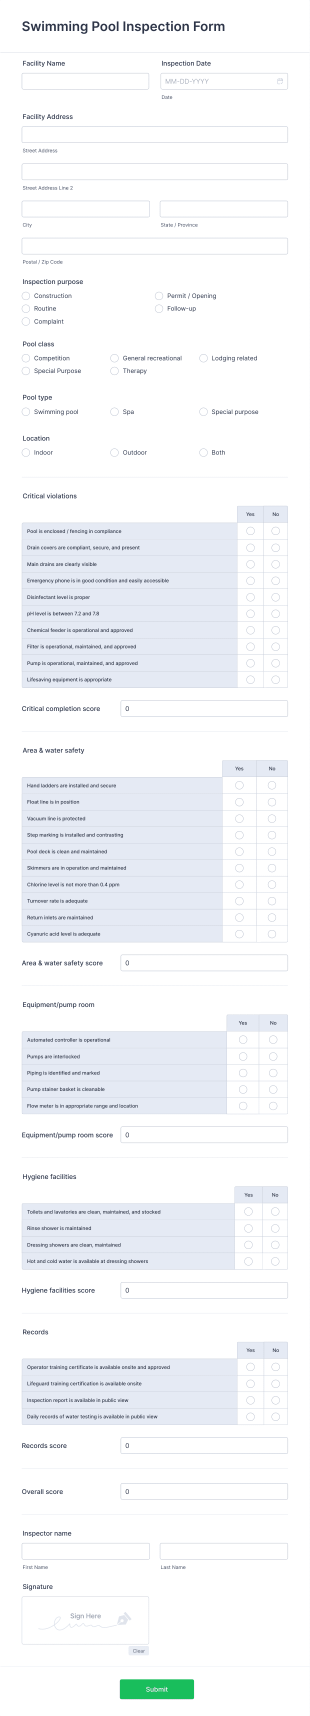 Swimming Pool Inspection Form Template